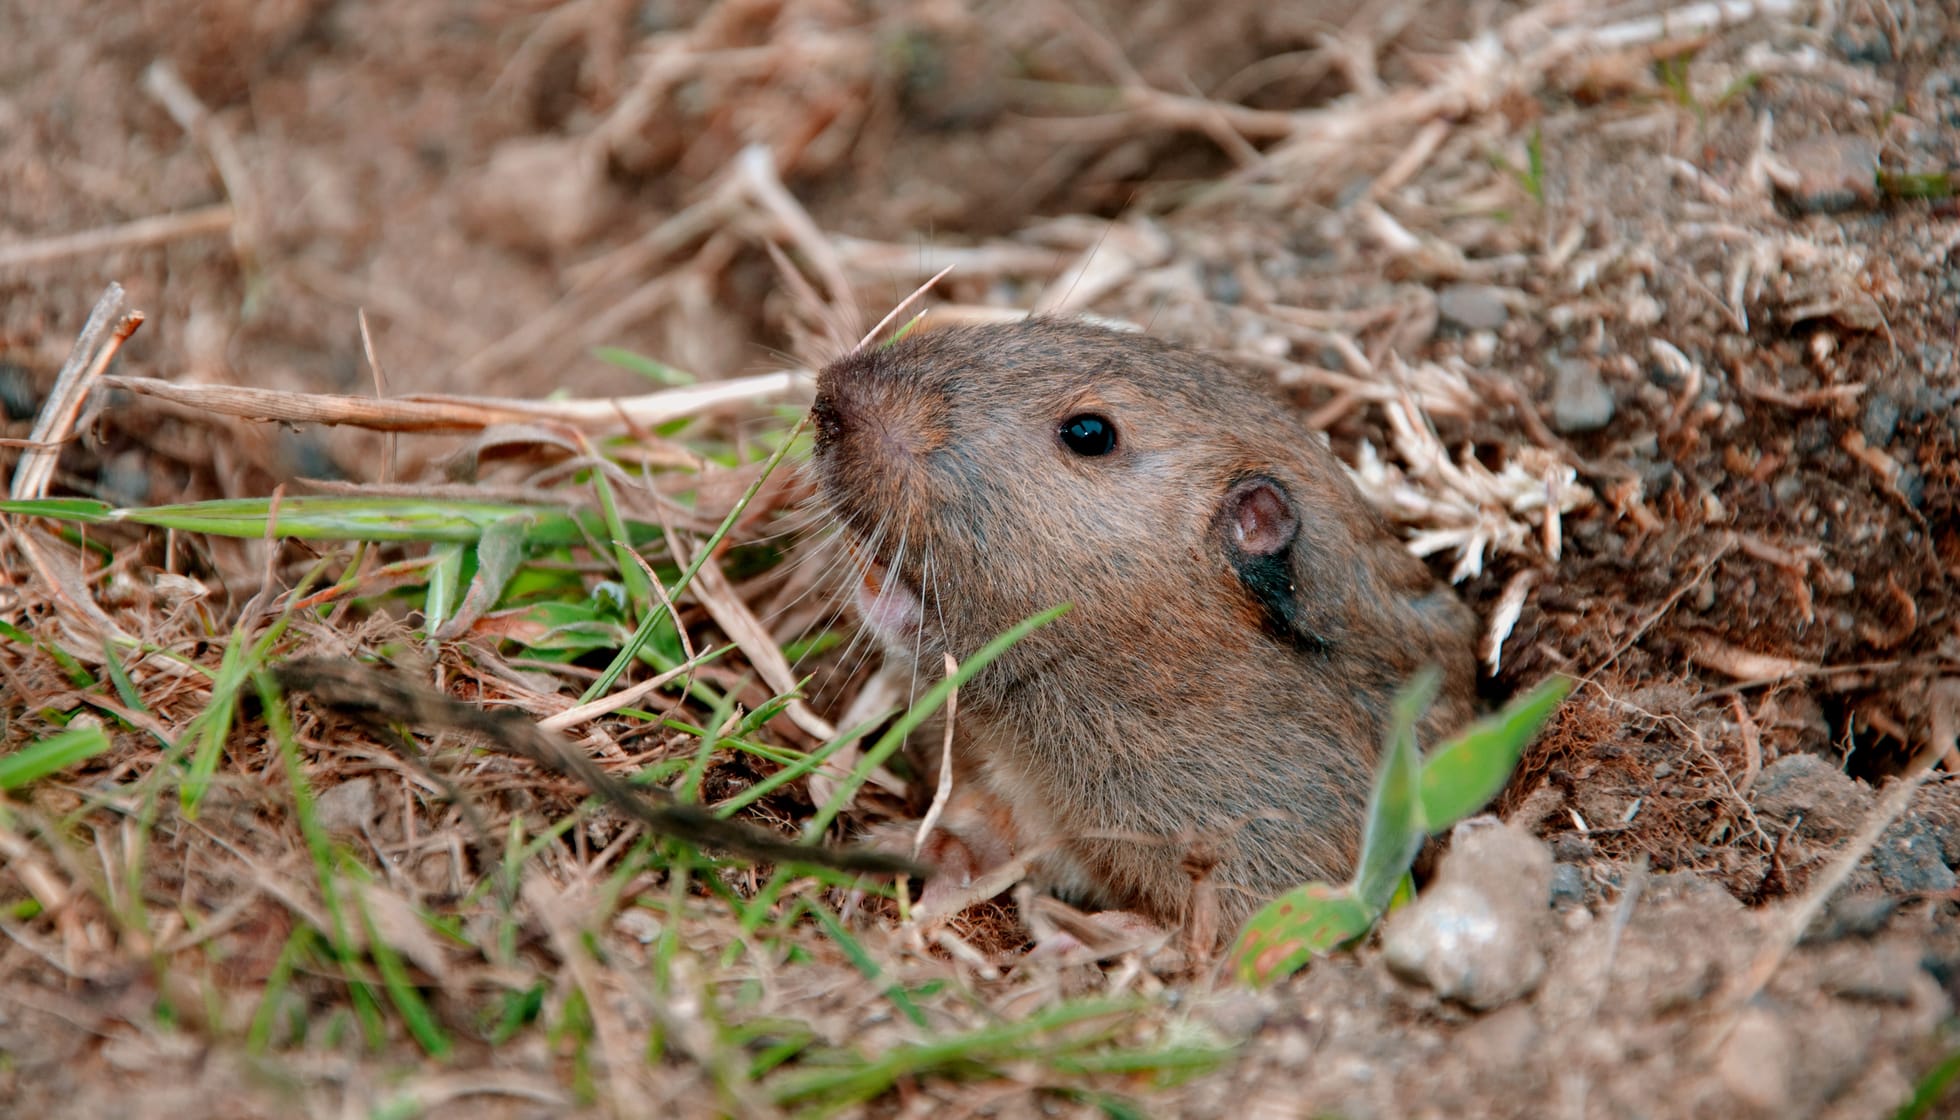 Pocket Gopher coming out of its burrow